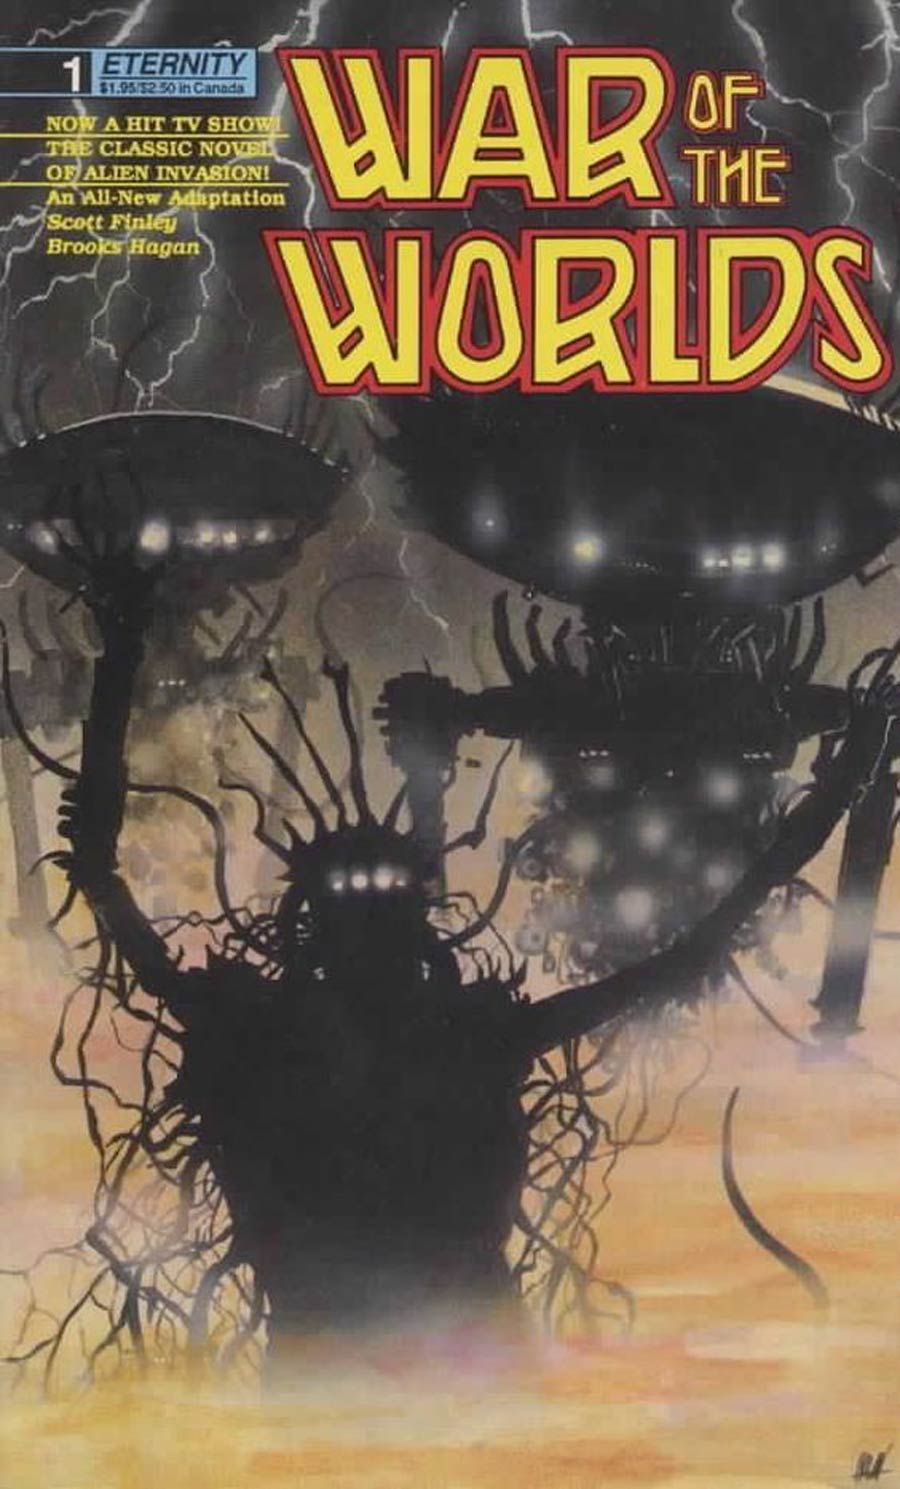 War Of The Worlds (Eternity) #1